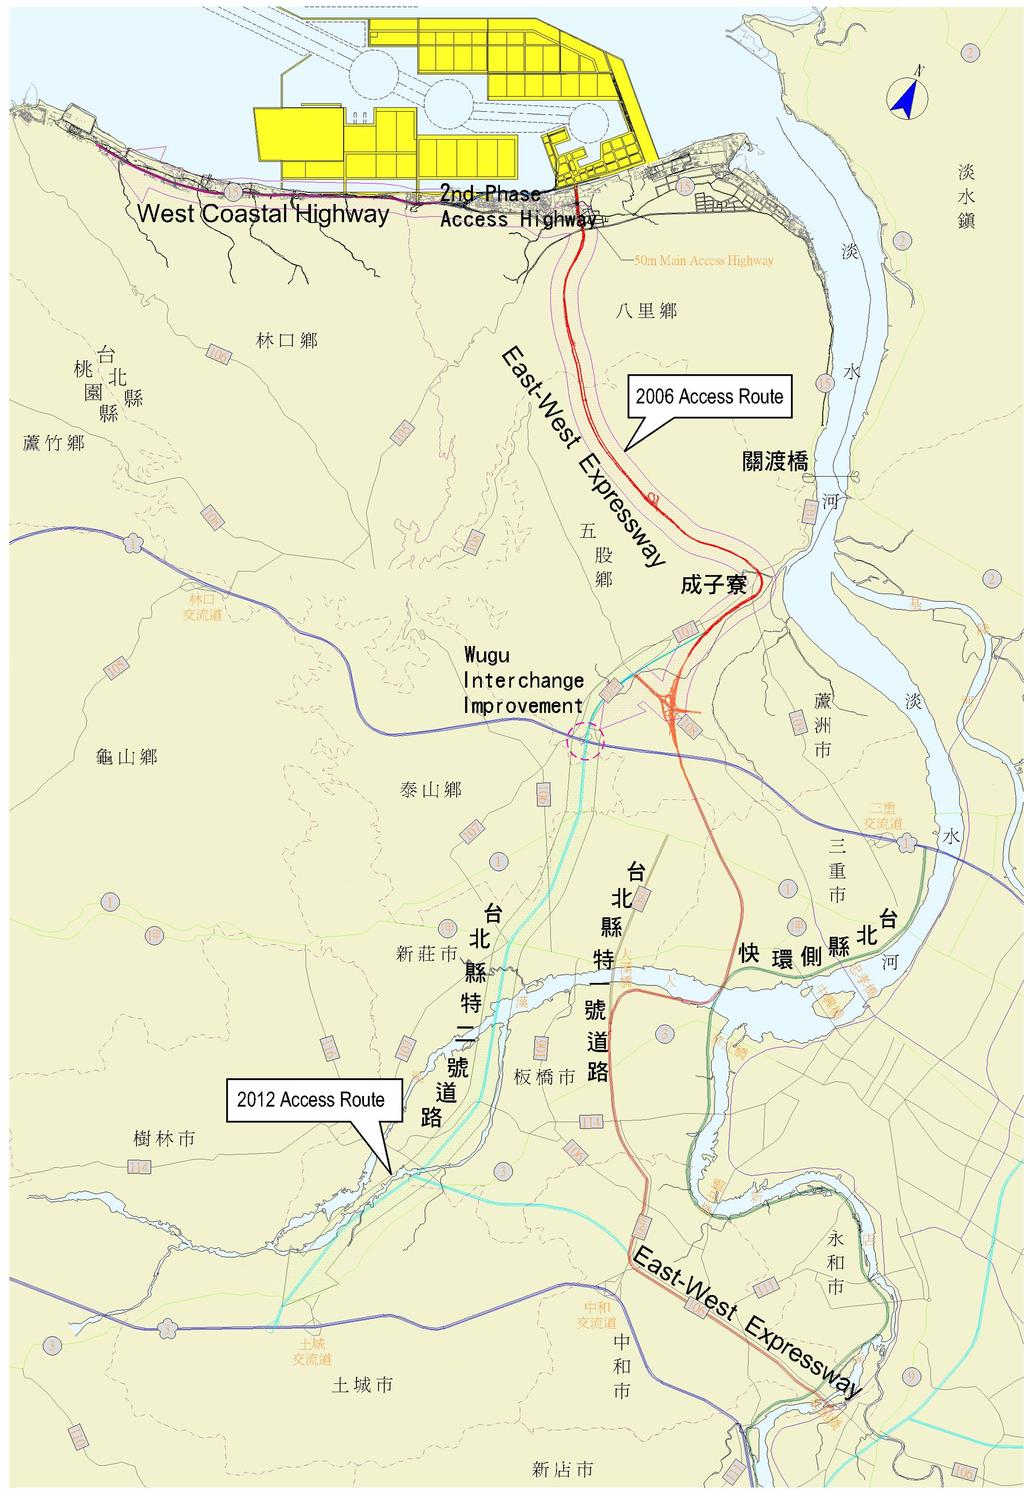 d. The estimated completion date of the improvement work of Wu-gu